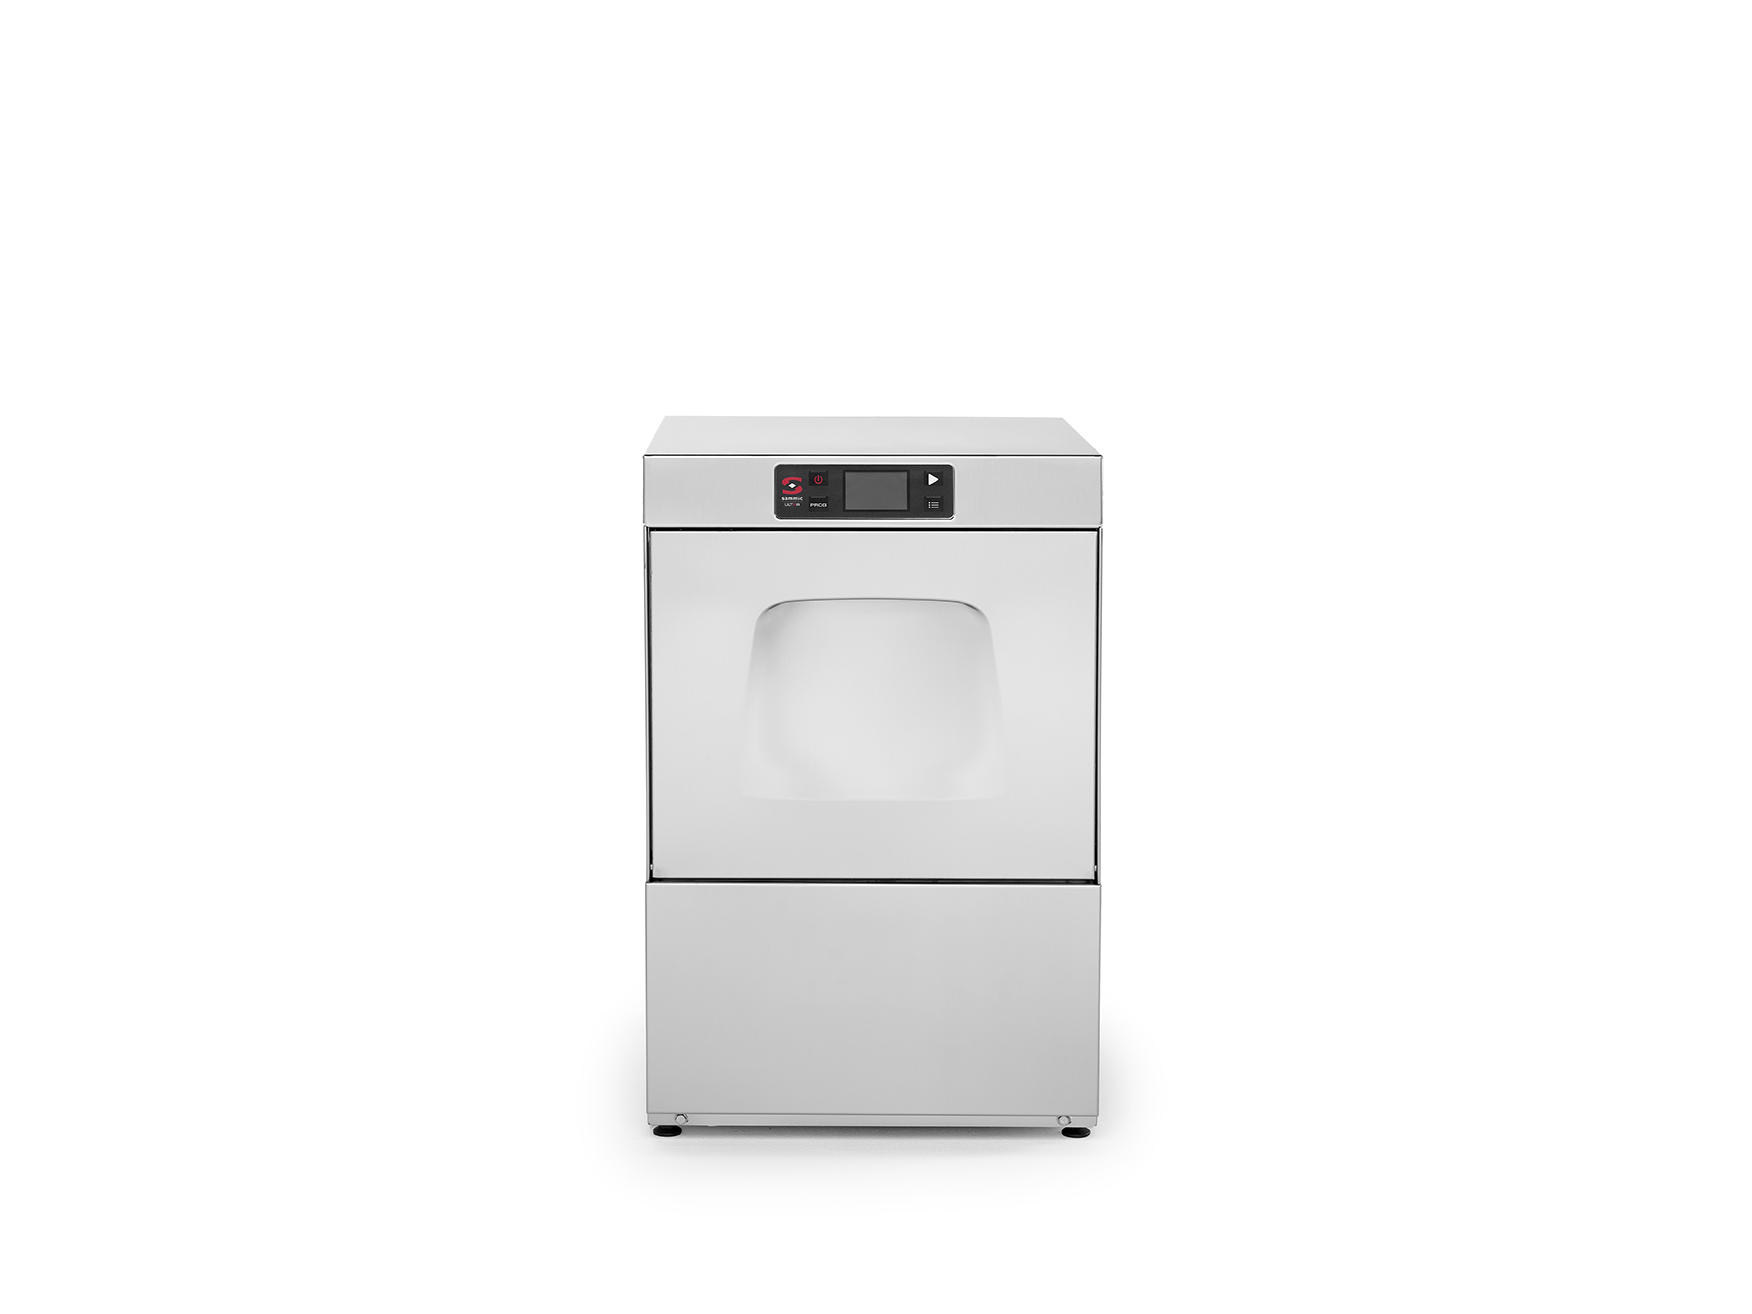 New AX-UX glass- and dishwashers